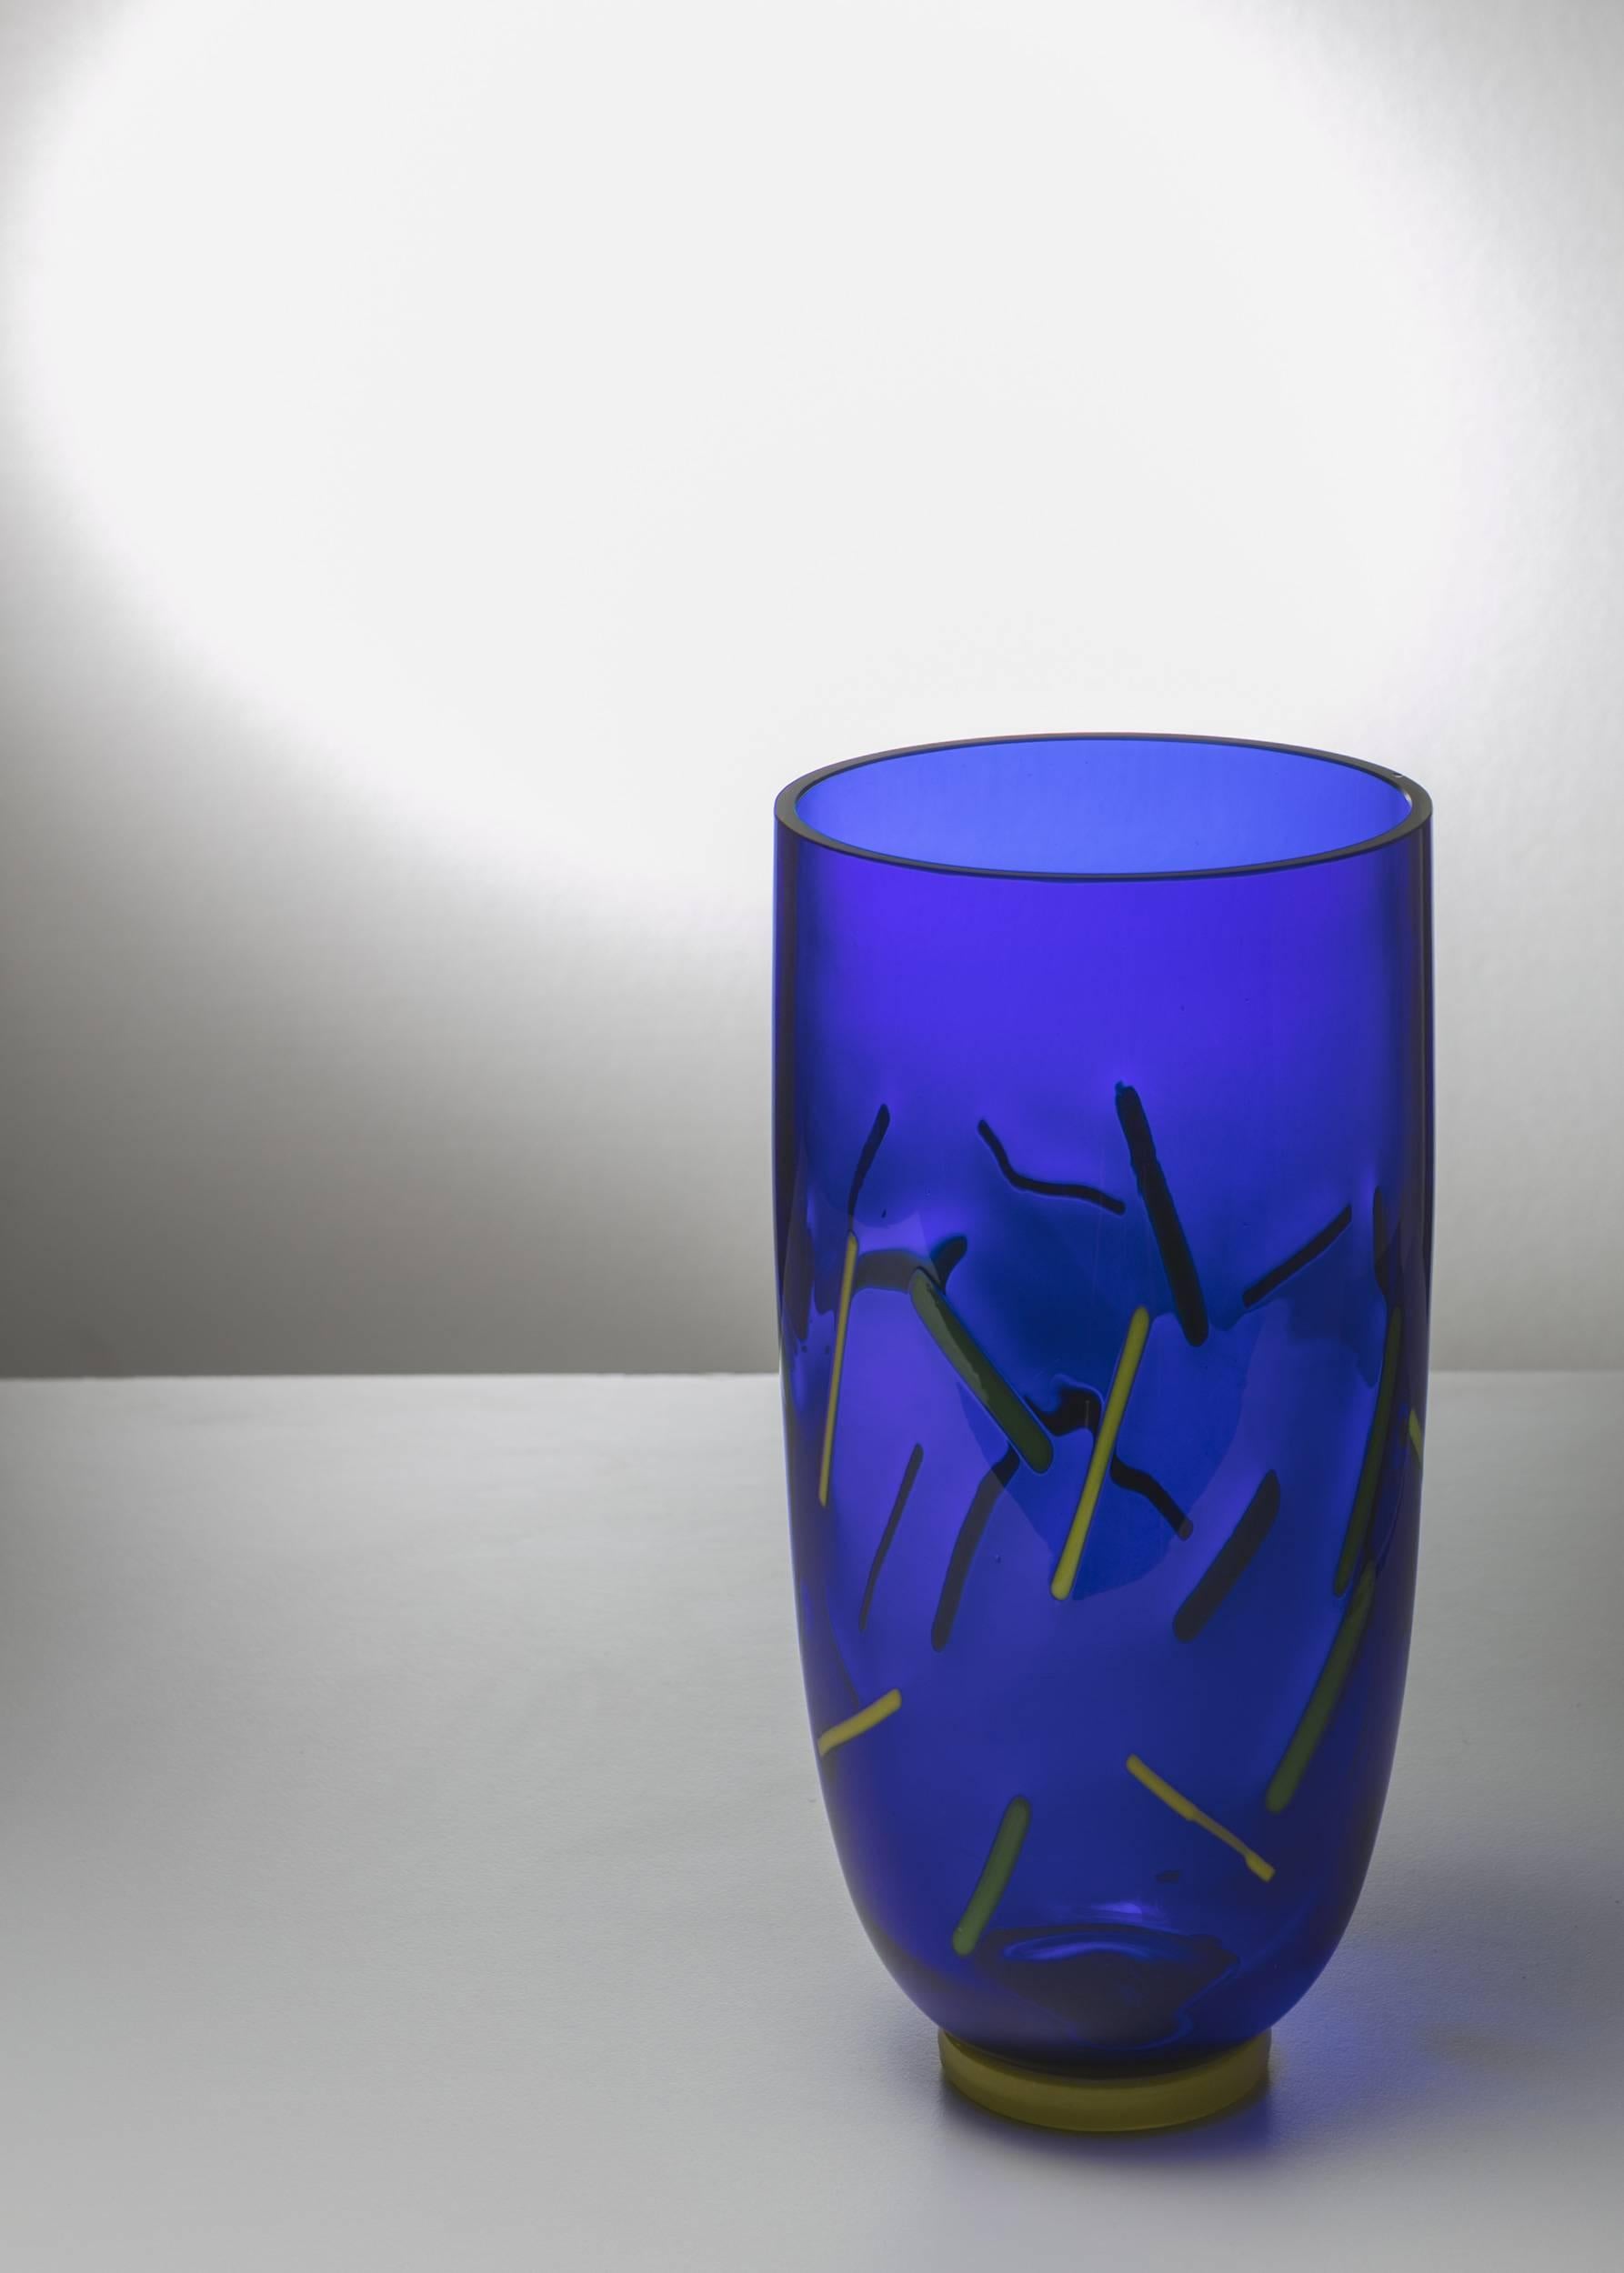 Remarkable Murano glass vase by Barovier and Toso.
Blue body with yellow and green inclusions.